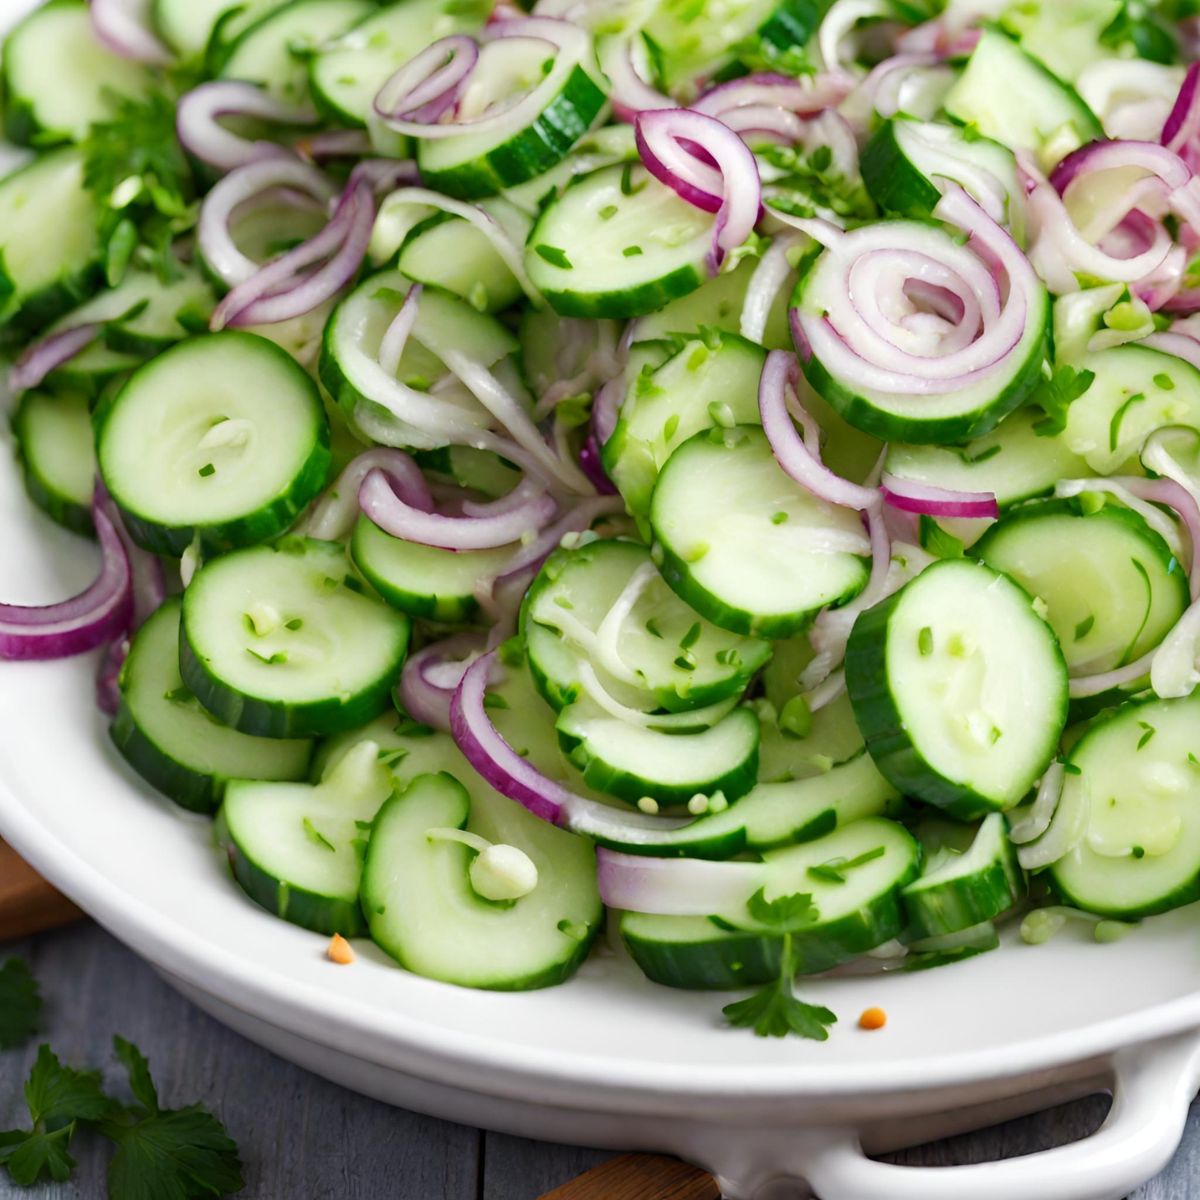 Cucumber And Onion Salad Recipe "A Refreshing Treat"